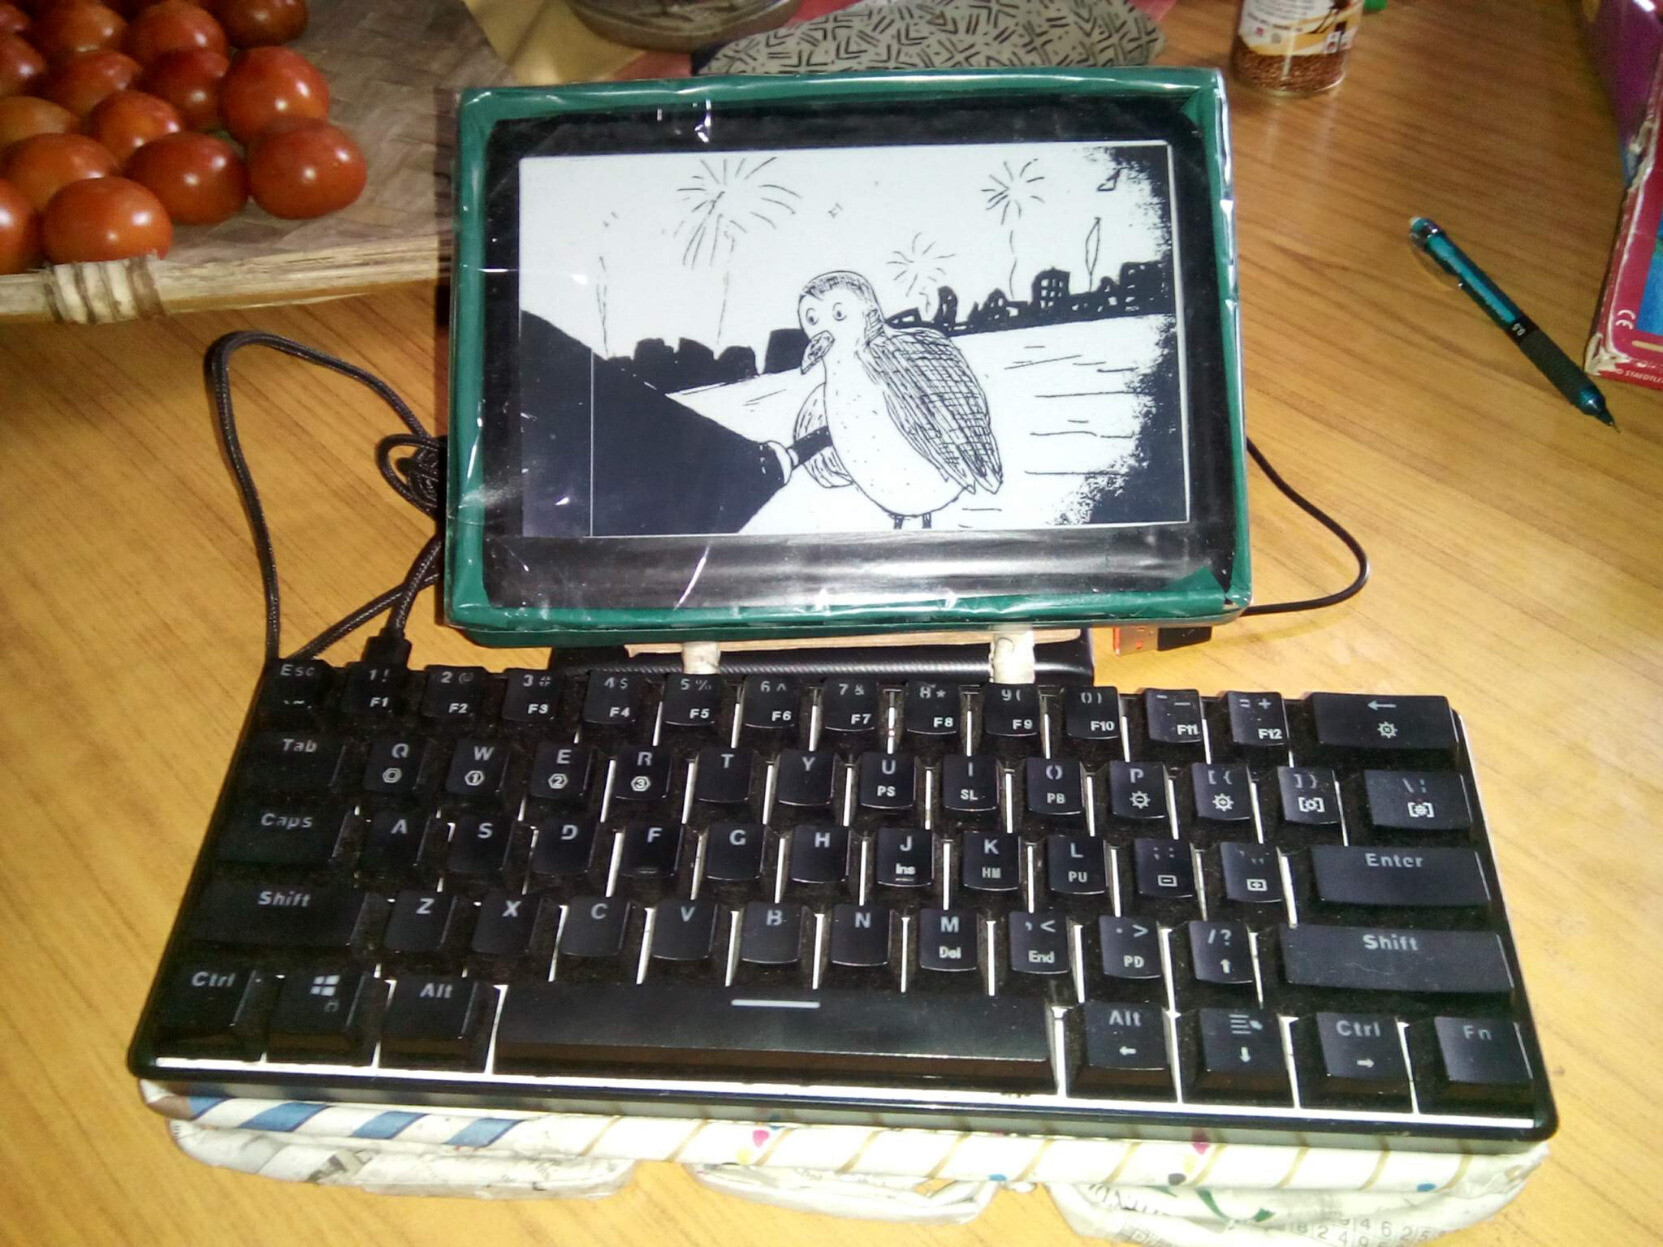 Home-made device with an e-paper screen attached to a mechanical keyboard. The screen is framed by a green-covered cardboard case; this is in turn attached to the keyboard and supported by coiled and rolled-up newspaper.